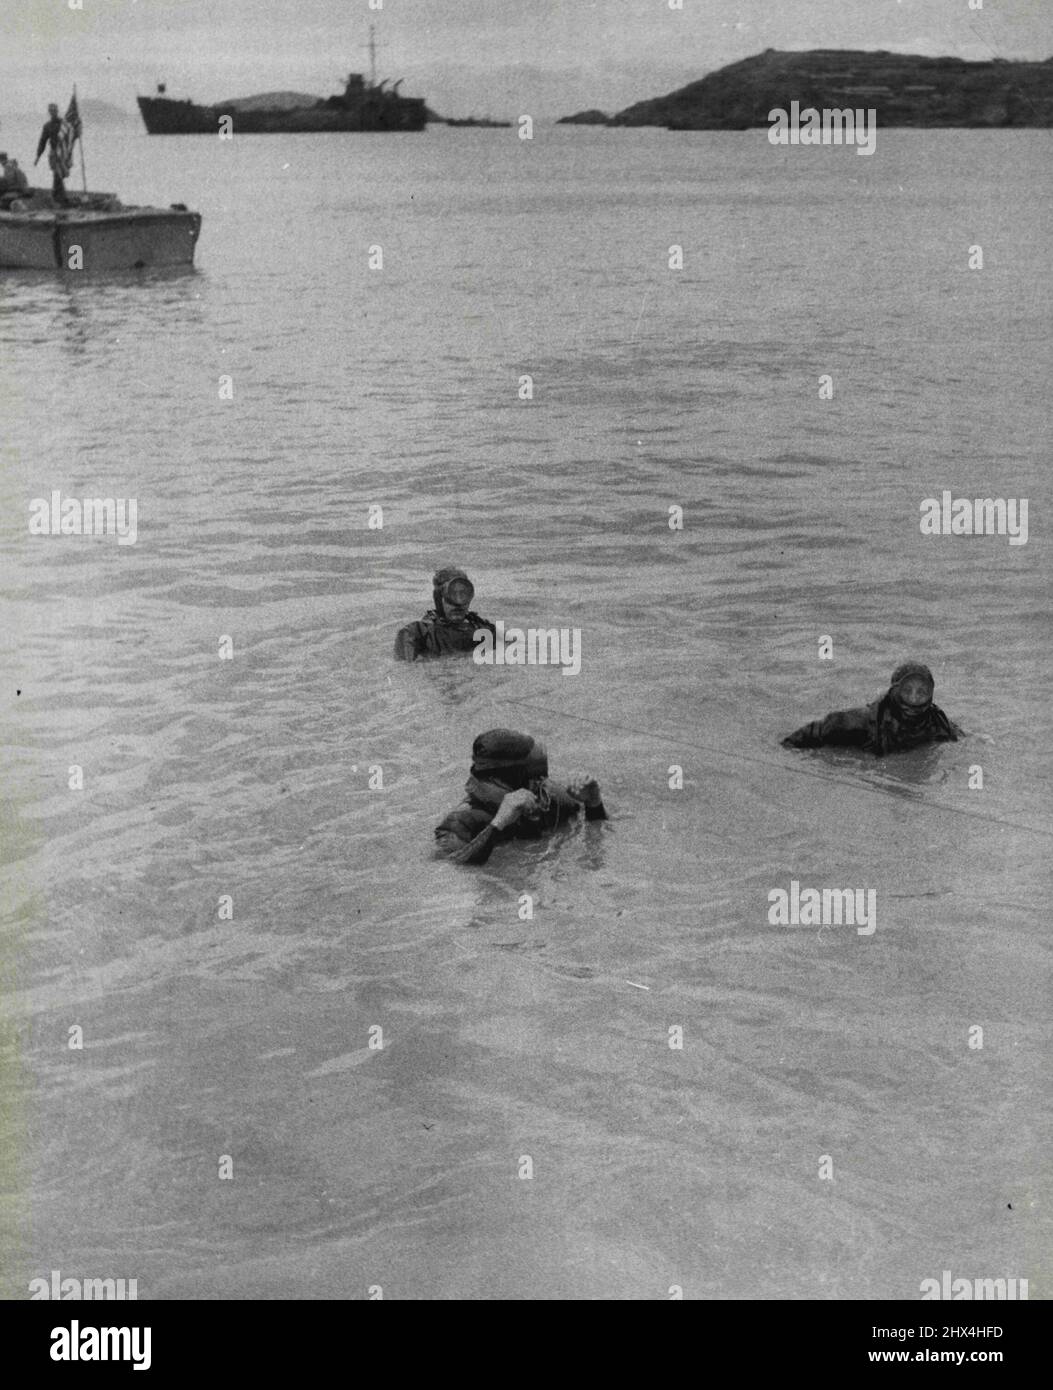 The Uprooted -- 'Frogmen' of the underwater demolition teams of the U.S. 7th Fleet perform their duties in a 'Scorched Earth' plan. They destroyed harbour facilities as well as onshore installations that might have been of use to the Chinese Communists. February 18, 1955. (Photo by United Press). Stock Photo